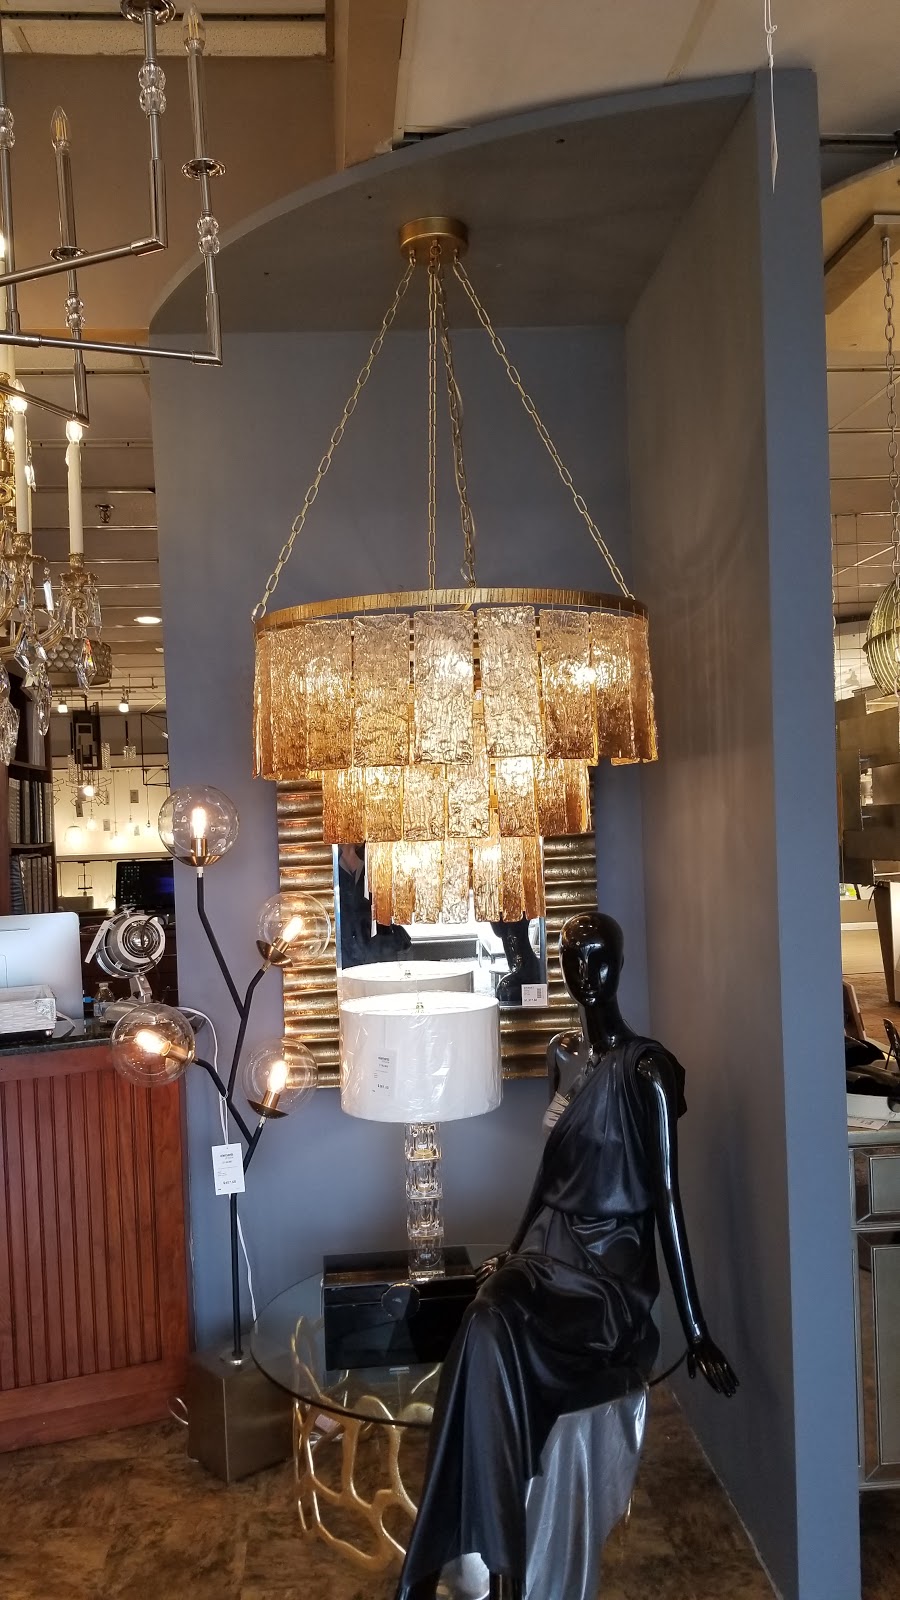 Elements Lighting + Decor | 227 Glen Cove Rd, Carle Place, NY 11514 | Phone: (516) 747-4748